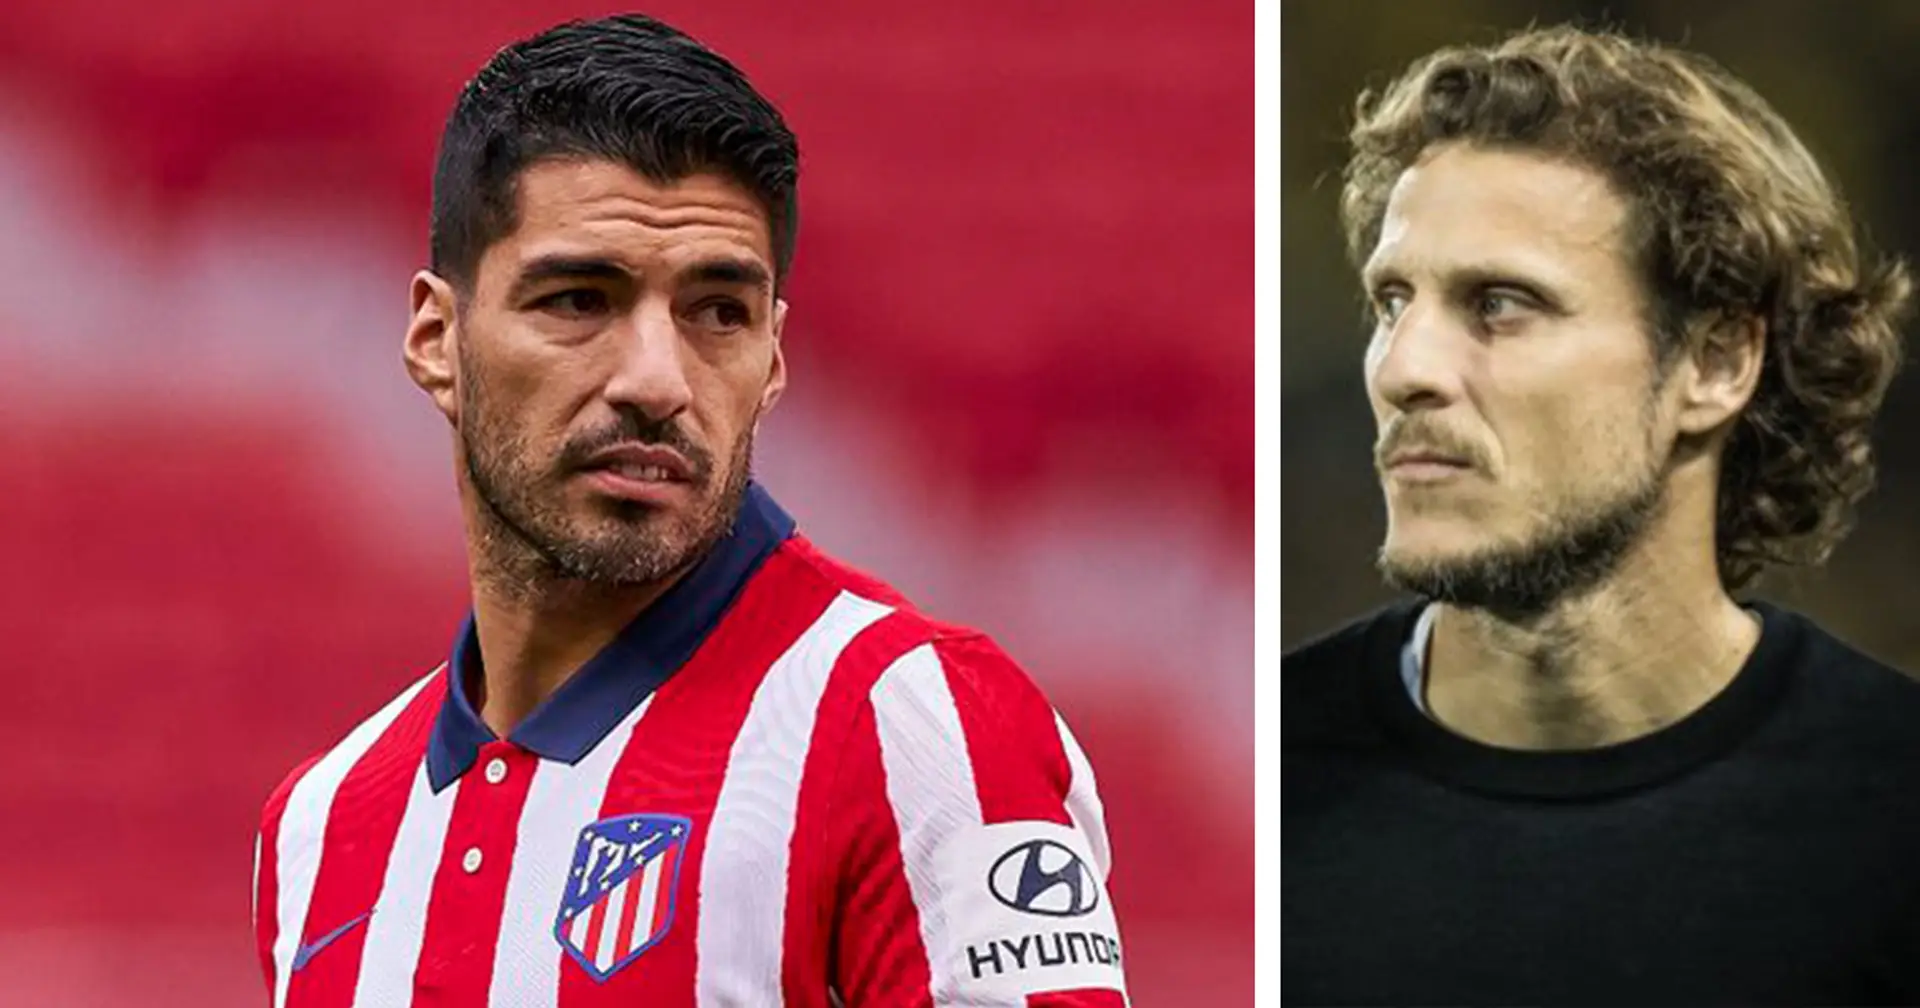 'Many people didn't like him, even Barca fans': Diego Forlan on Luis Suarez's exit